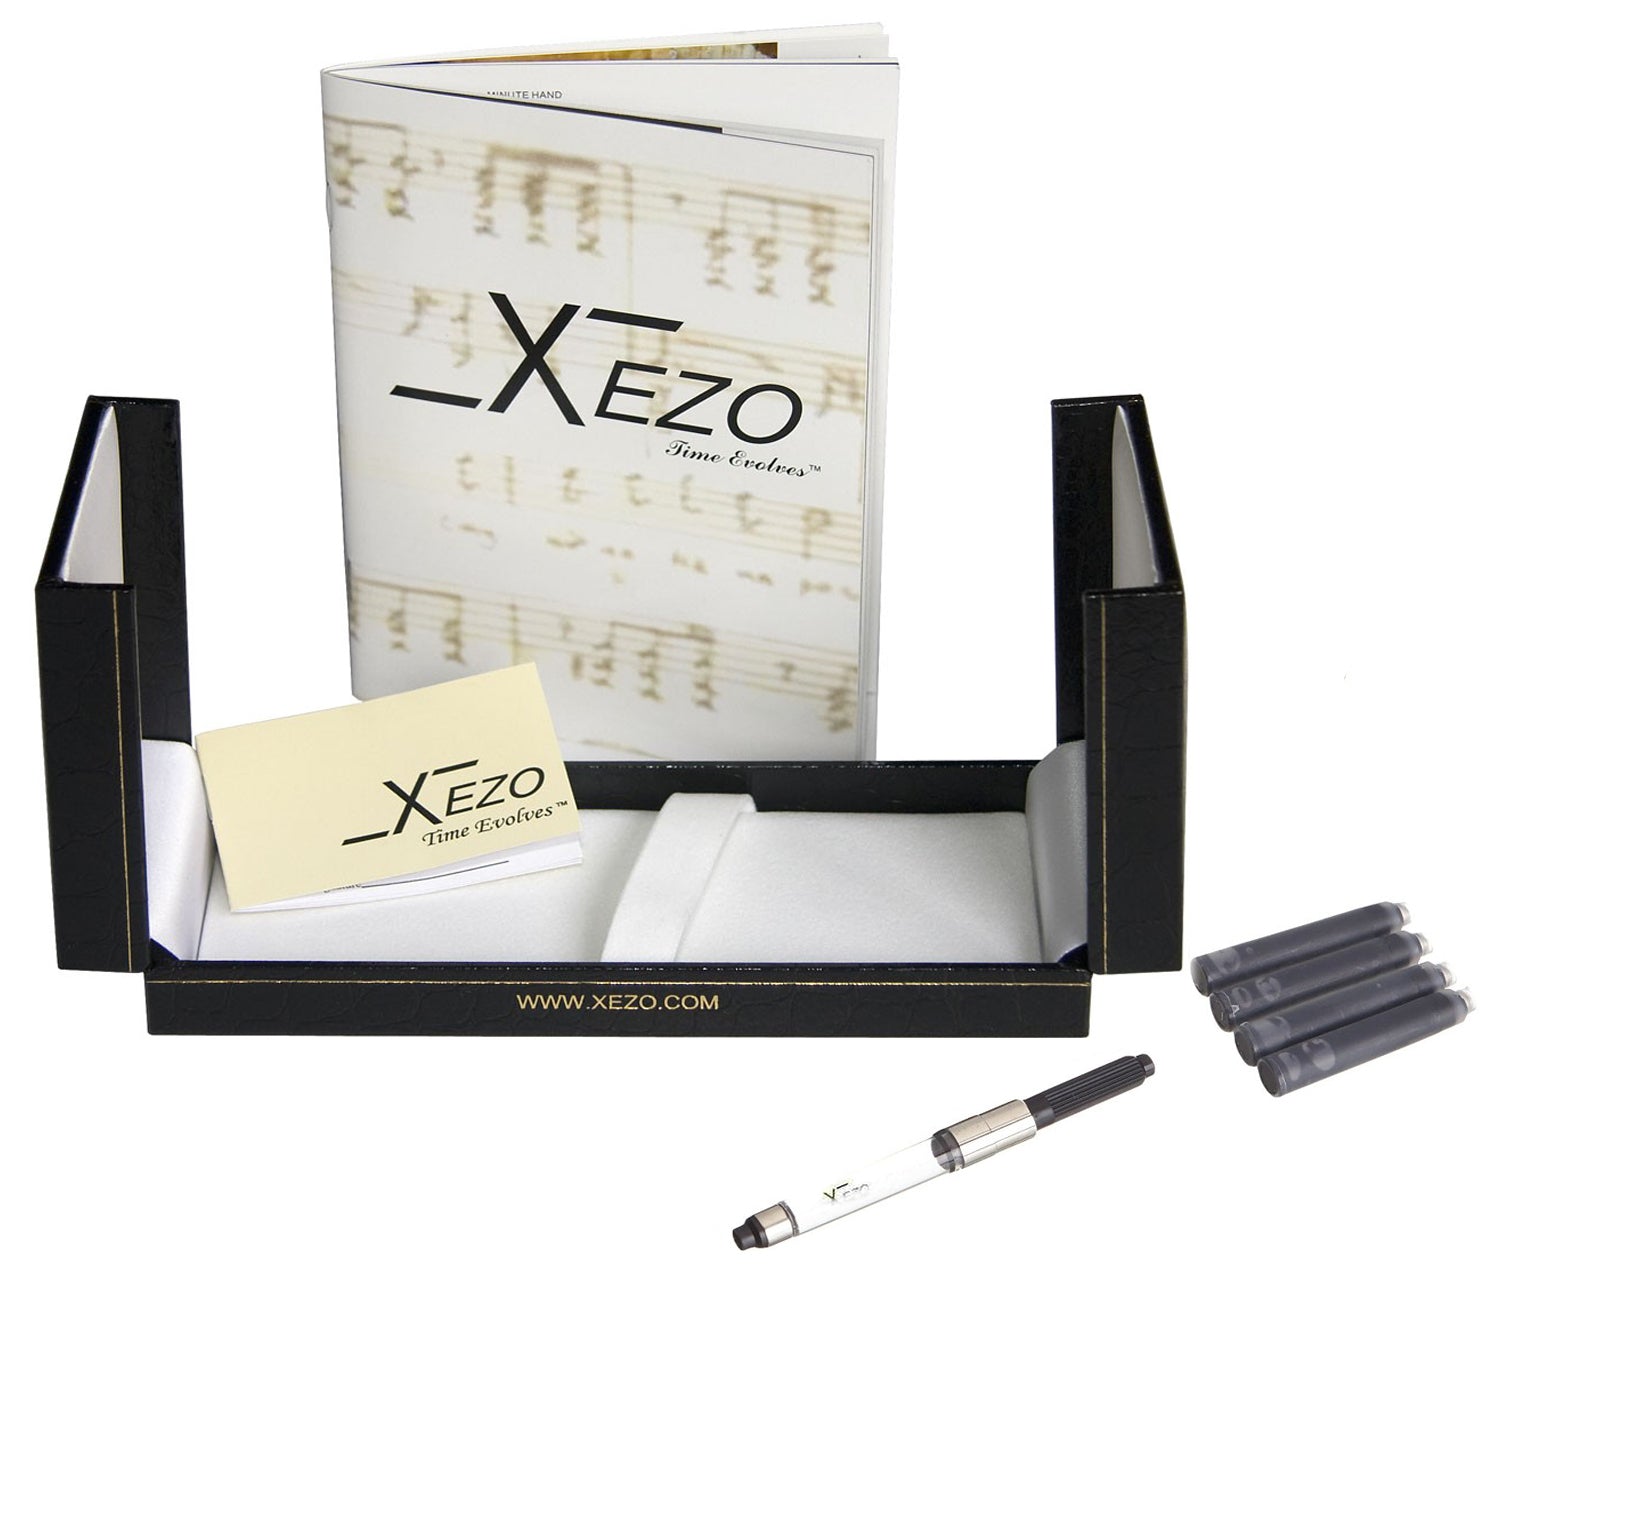 Xezo - Black gift box, certificate, manual, chrome plated ink converter, and four ink cartridges of the Incognito Forest FM fountain pen